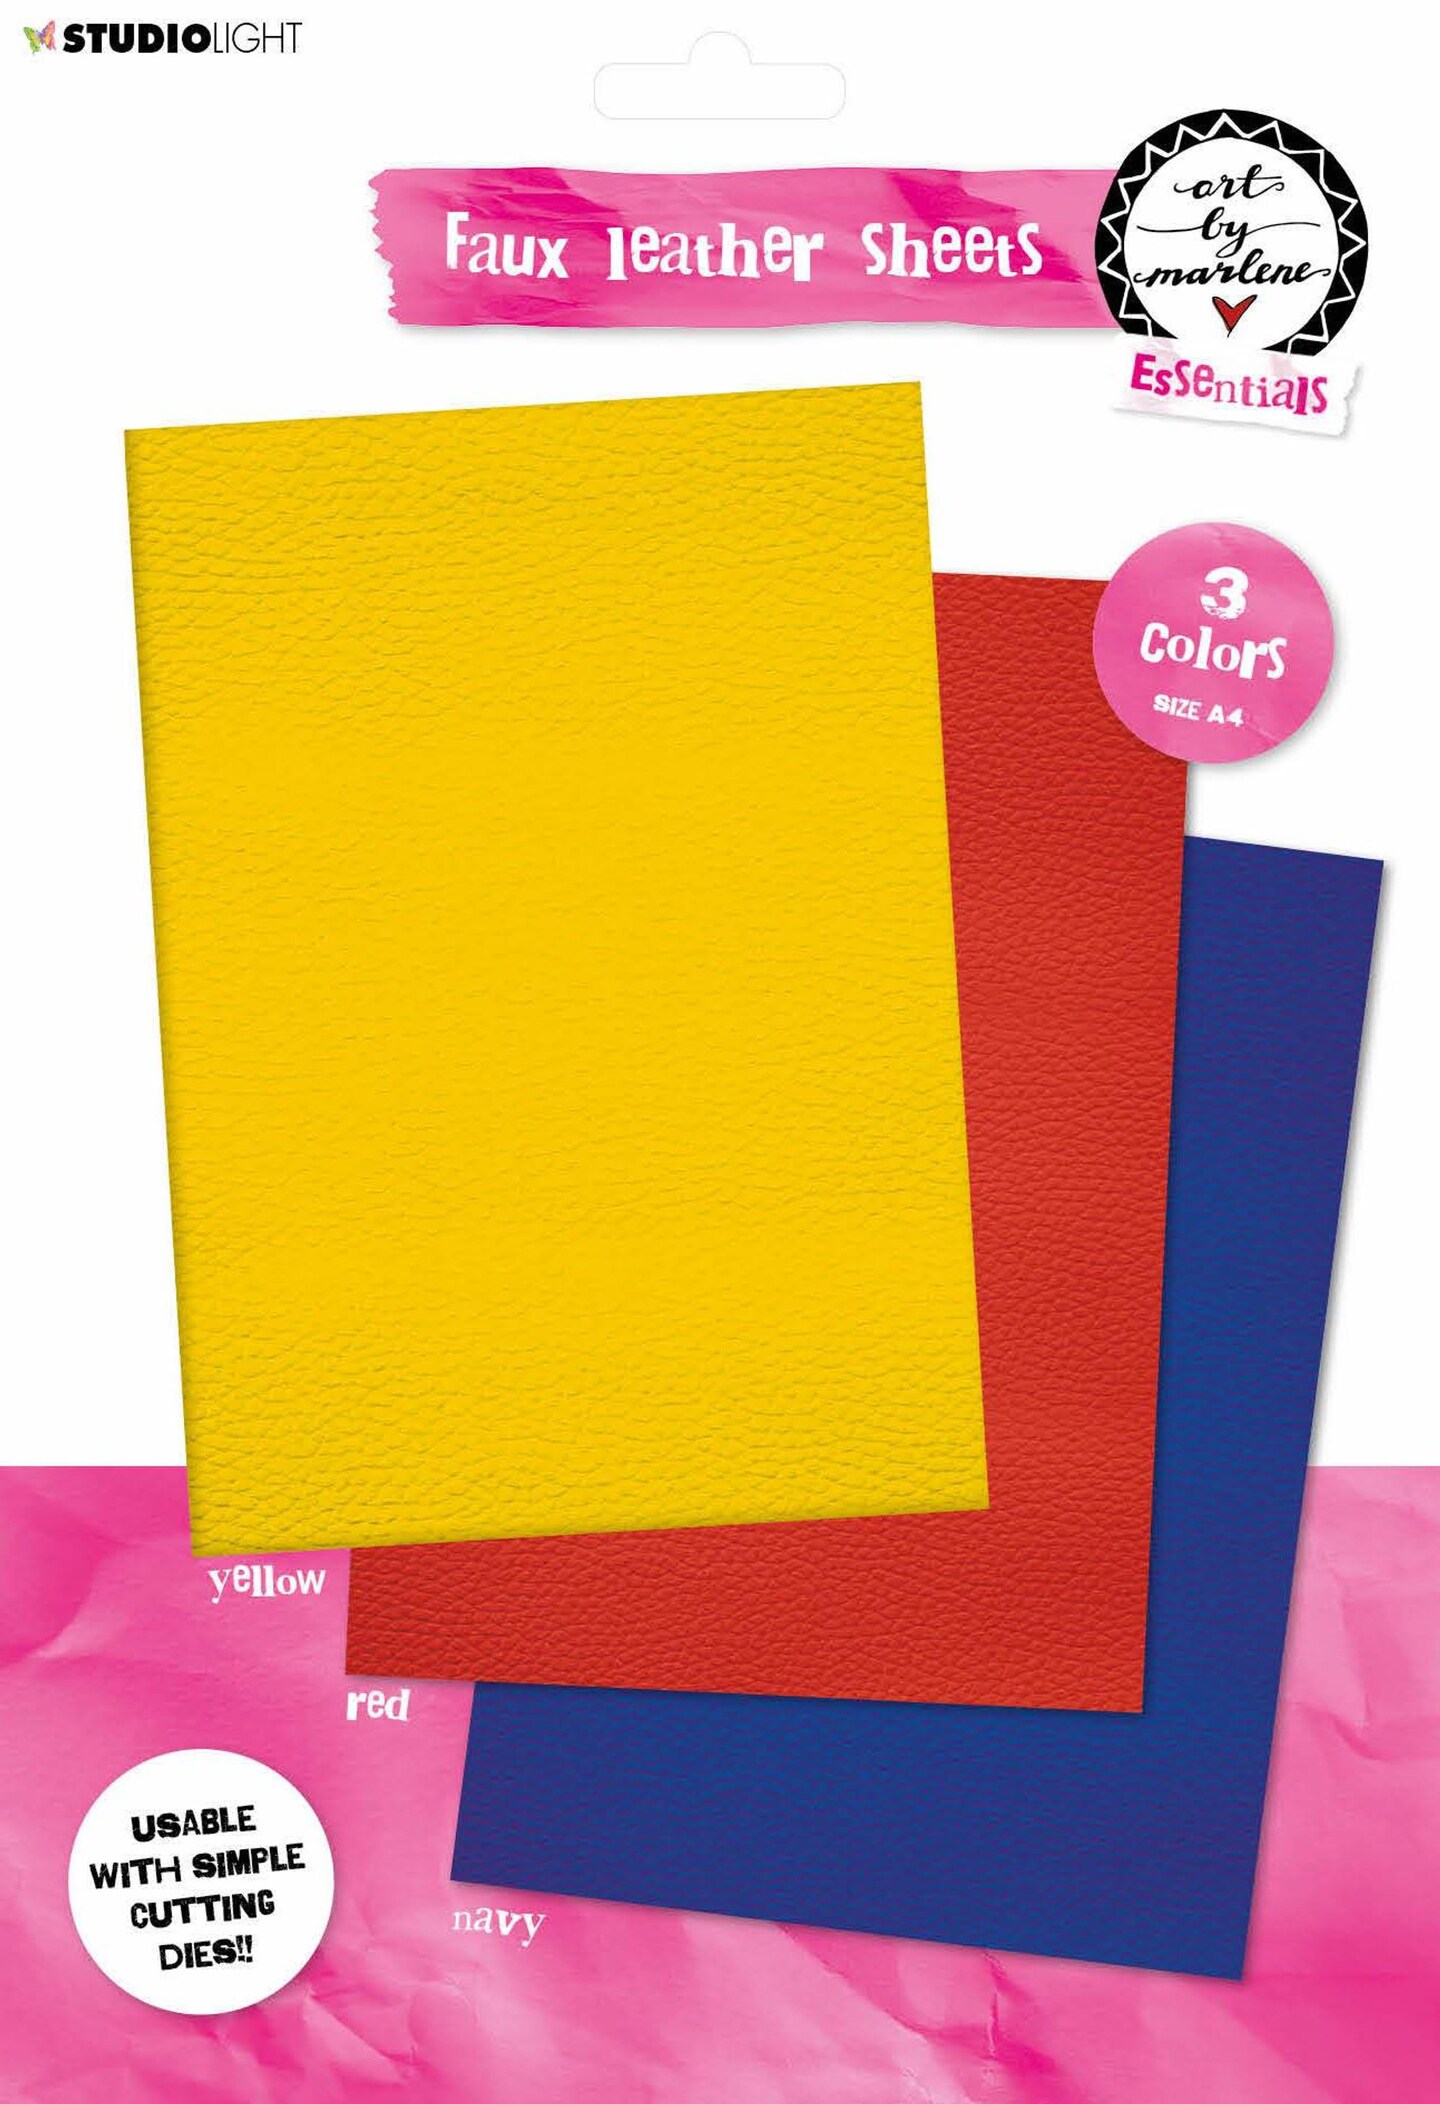 Studio Light Art By Marlene Faux Leather Sheets Yellow/Red/Blue 210x297mm 3 SH nr.02